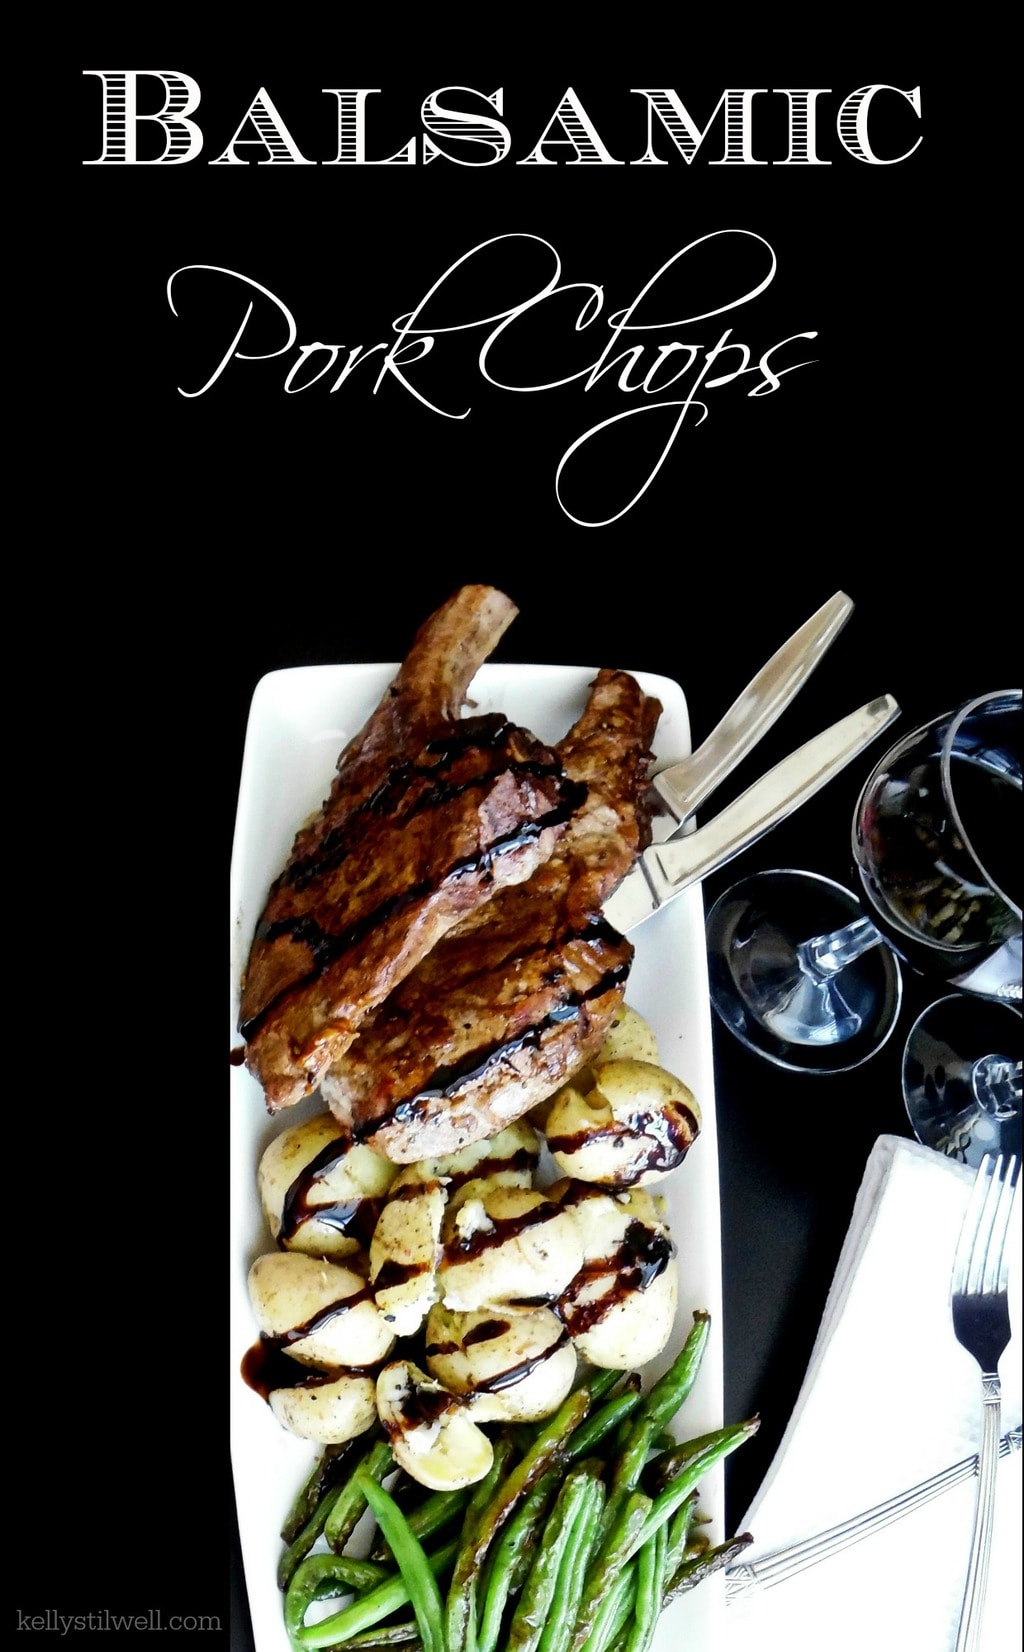 Balsamic Pork Chop Dinner for Two - Food Fun & Faraway Places